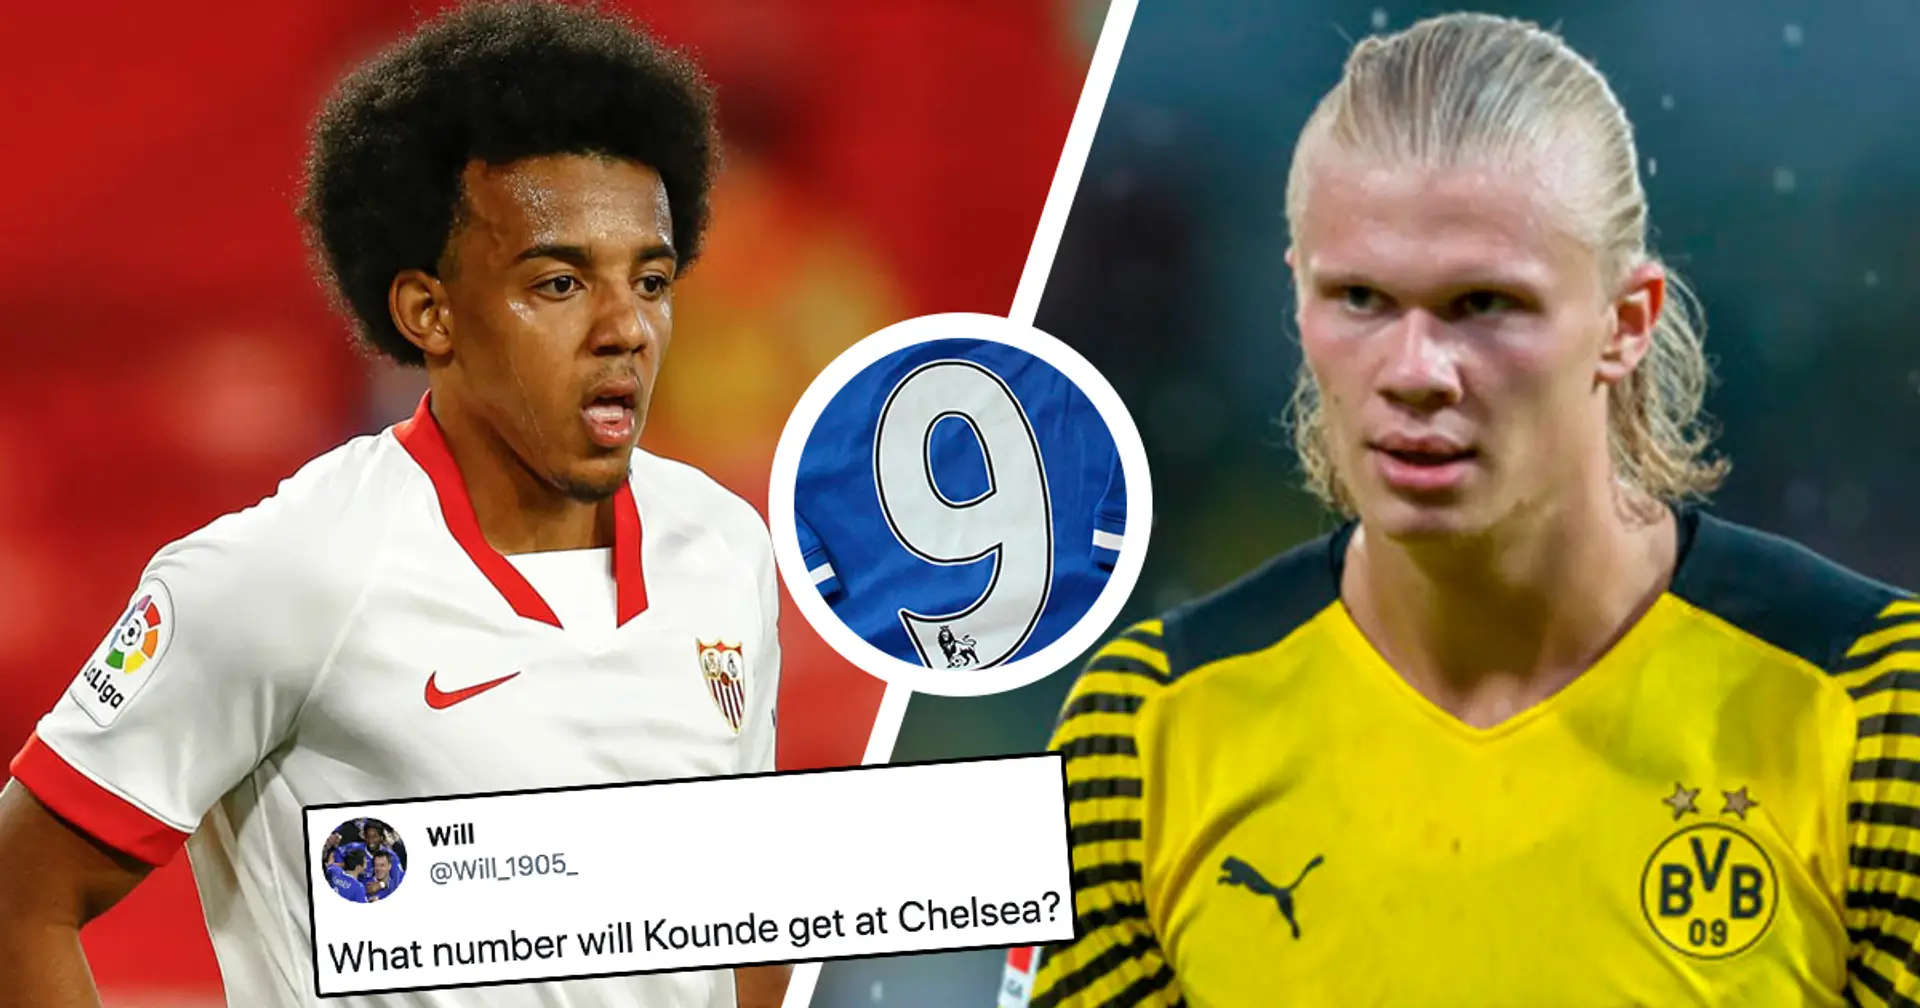 What jersey numbers would Haaland and Kounde get if signed for Chelsea? You asked, we answered